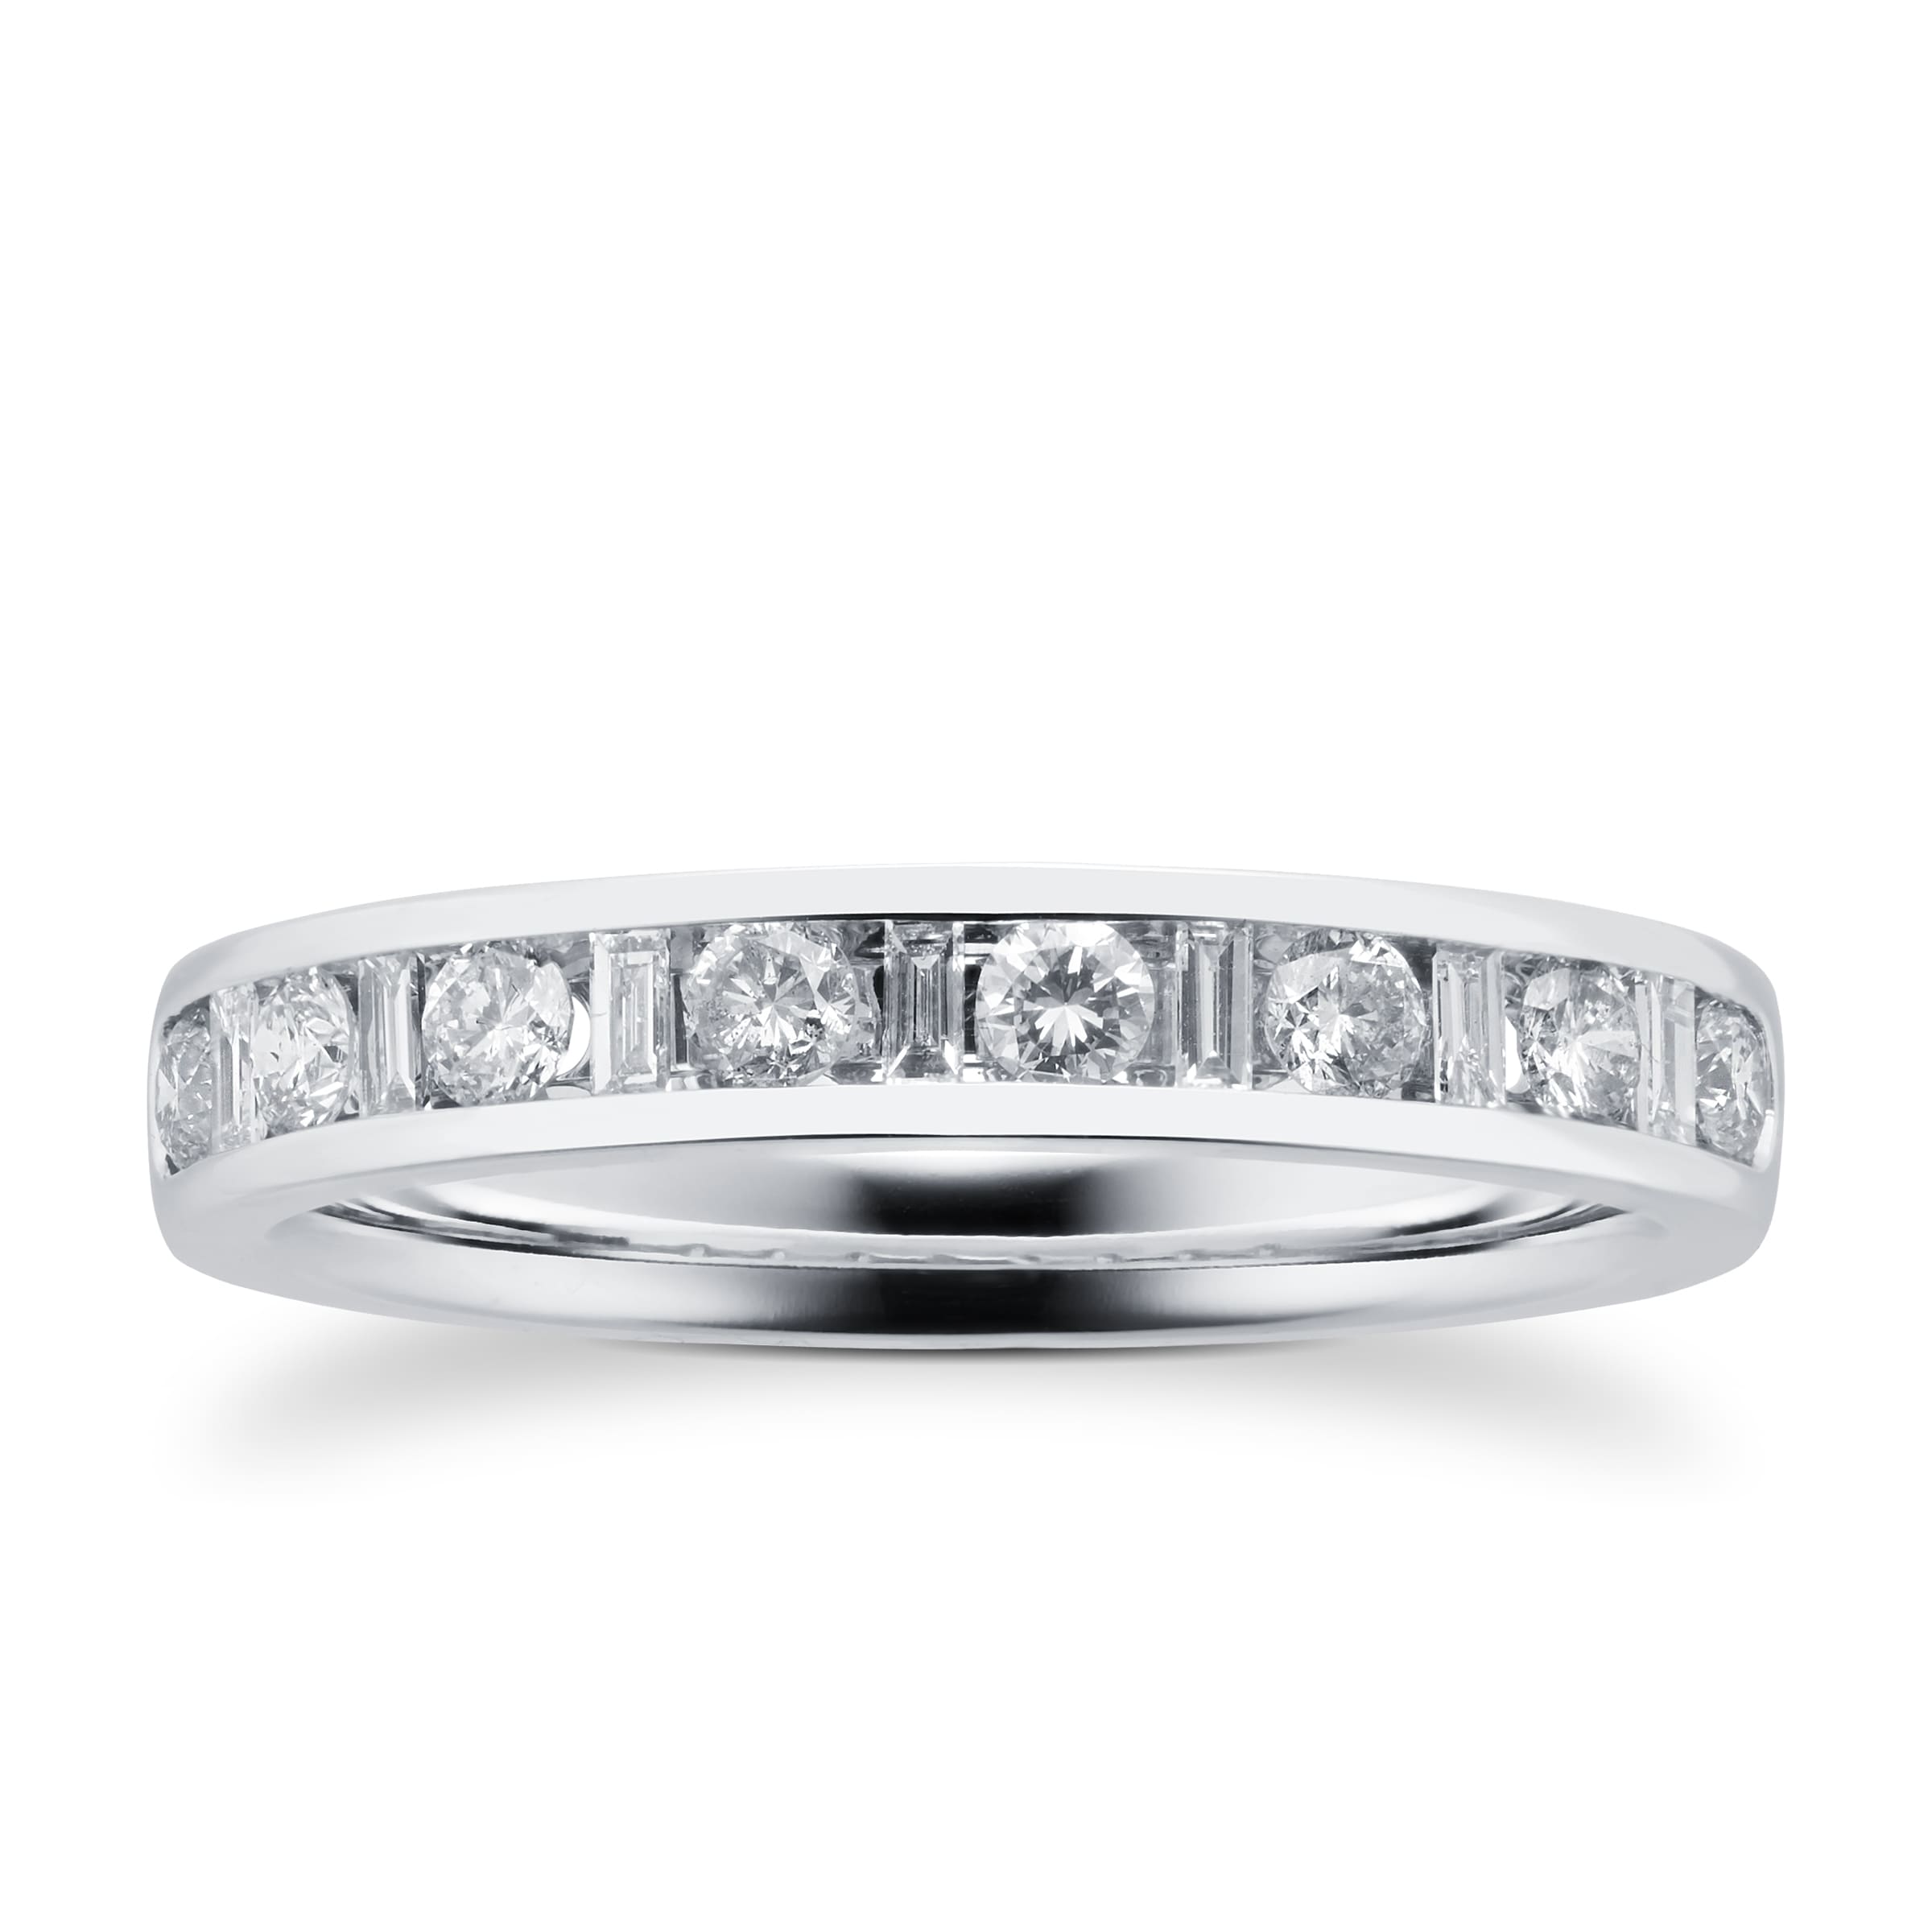 Baguette And Brilliant Cut 0.50 Carat Total Weight Diamond Half Eternity Ring In 18 Carat White Gold - Ring Size Q